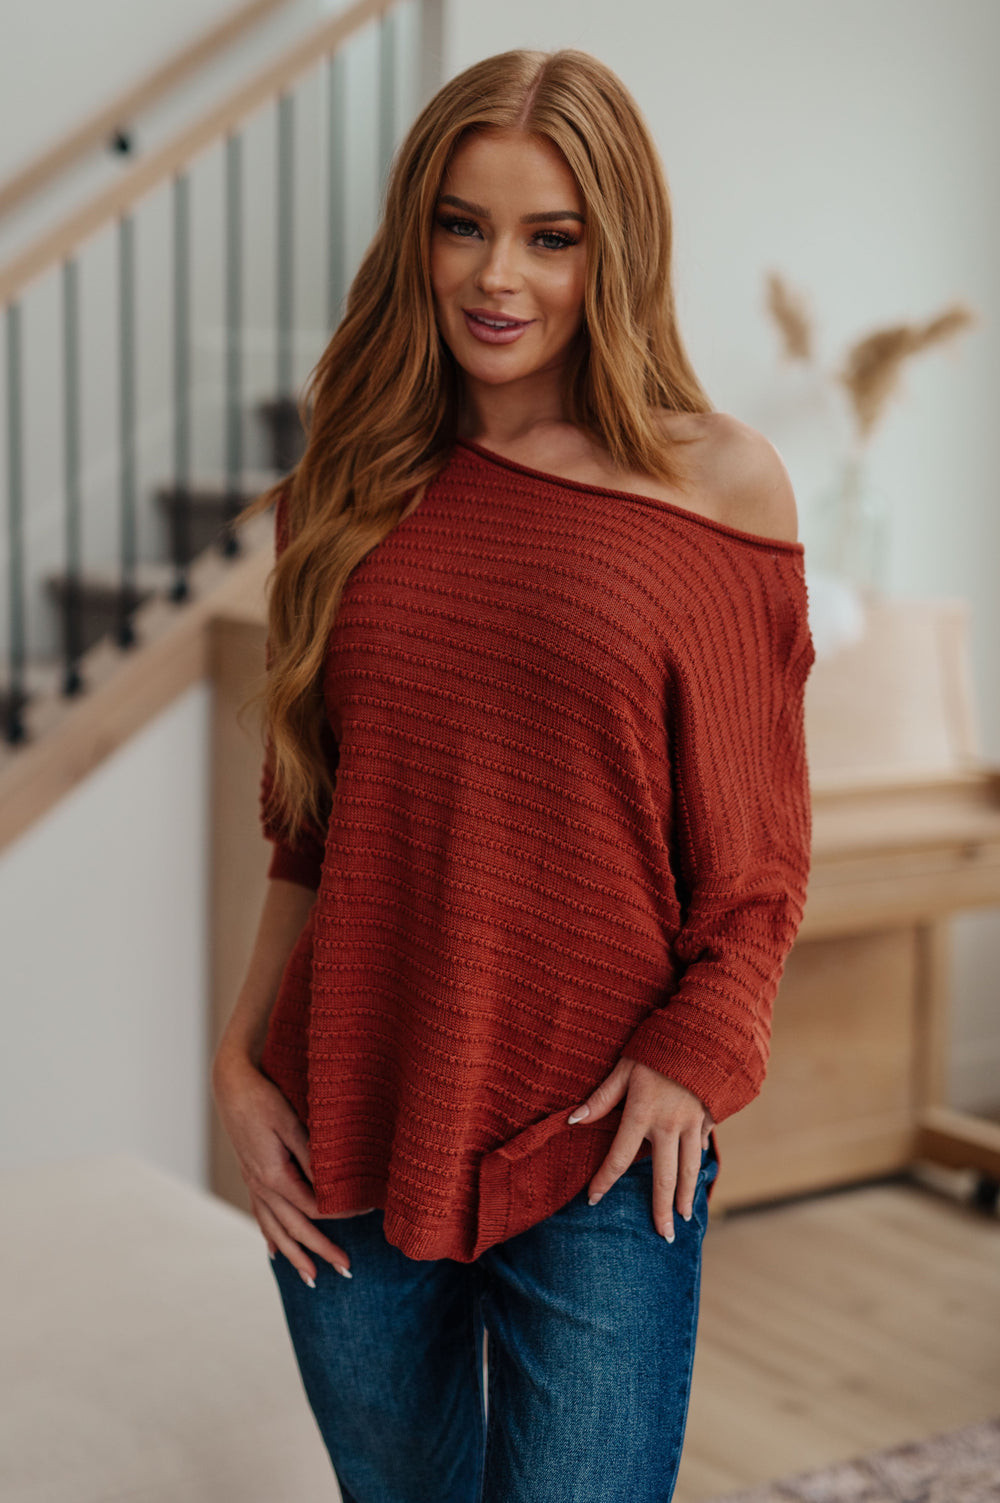 High Tide Oversize Top in Rust-Long Sleeve Tops-Inspired by Justeen-Women's Clothing Boutique in Chicago, Illinois